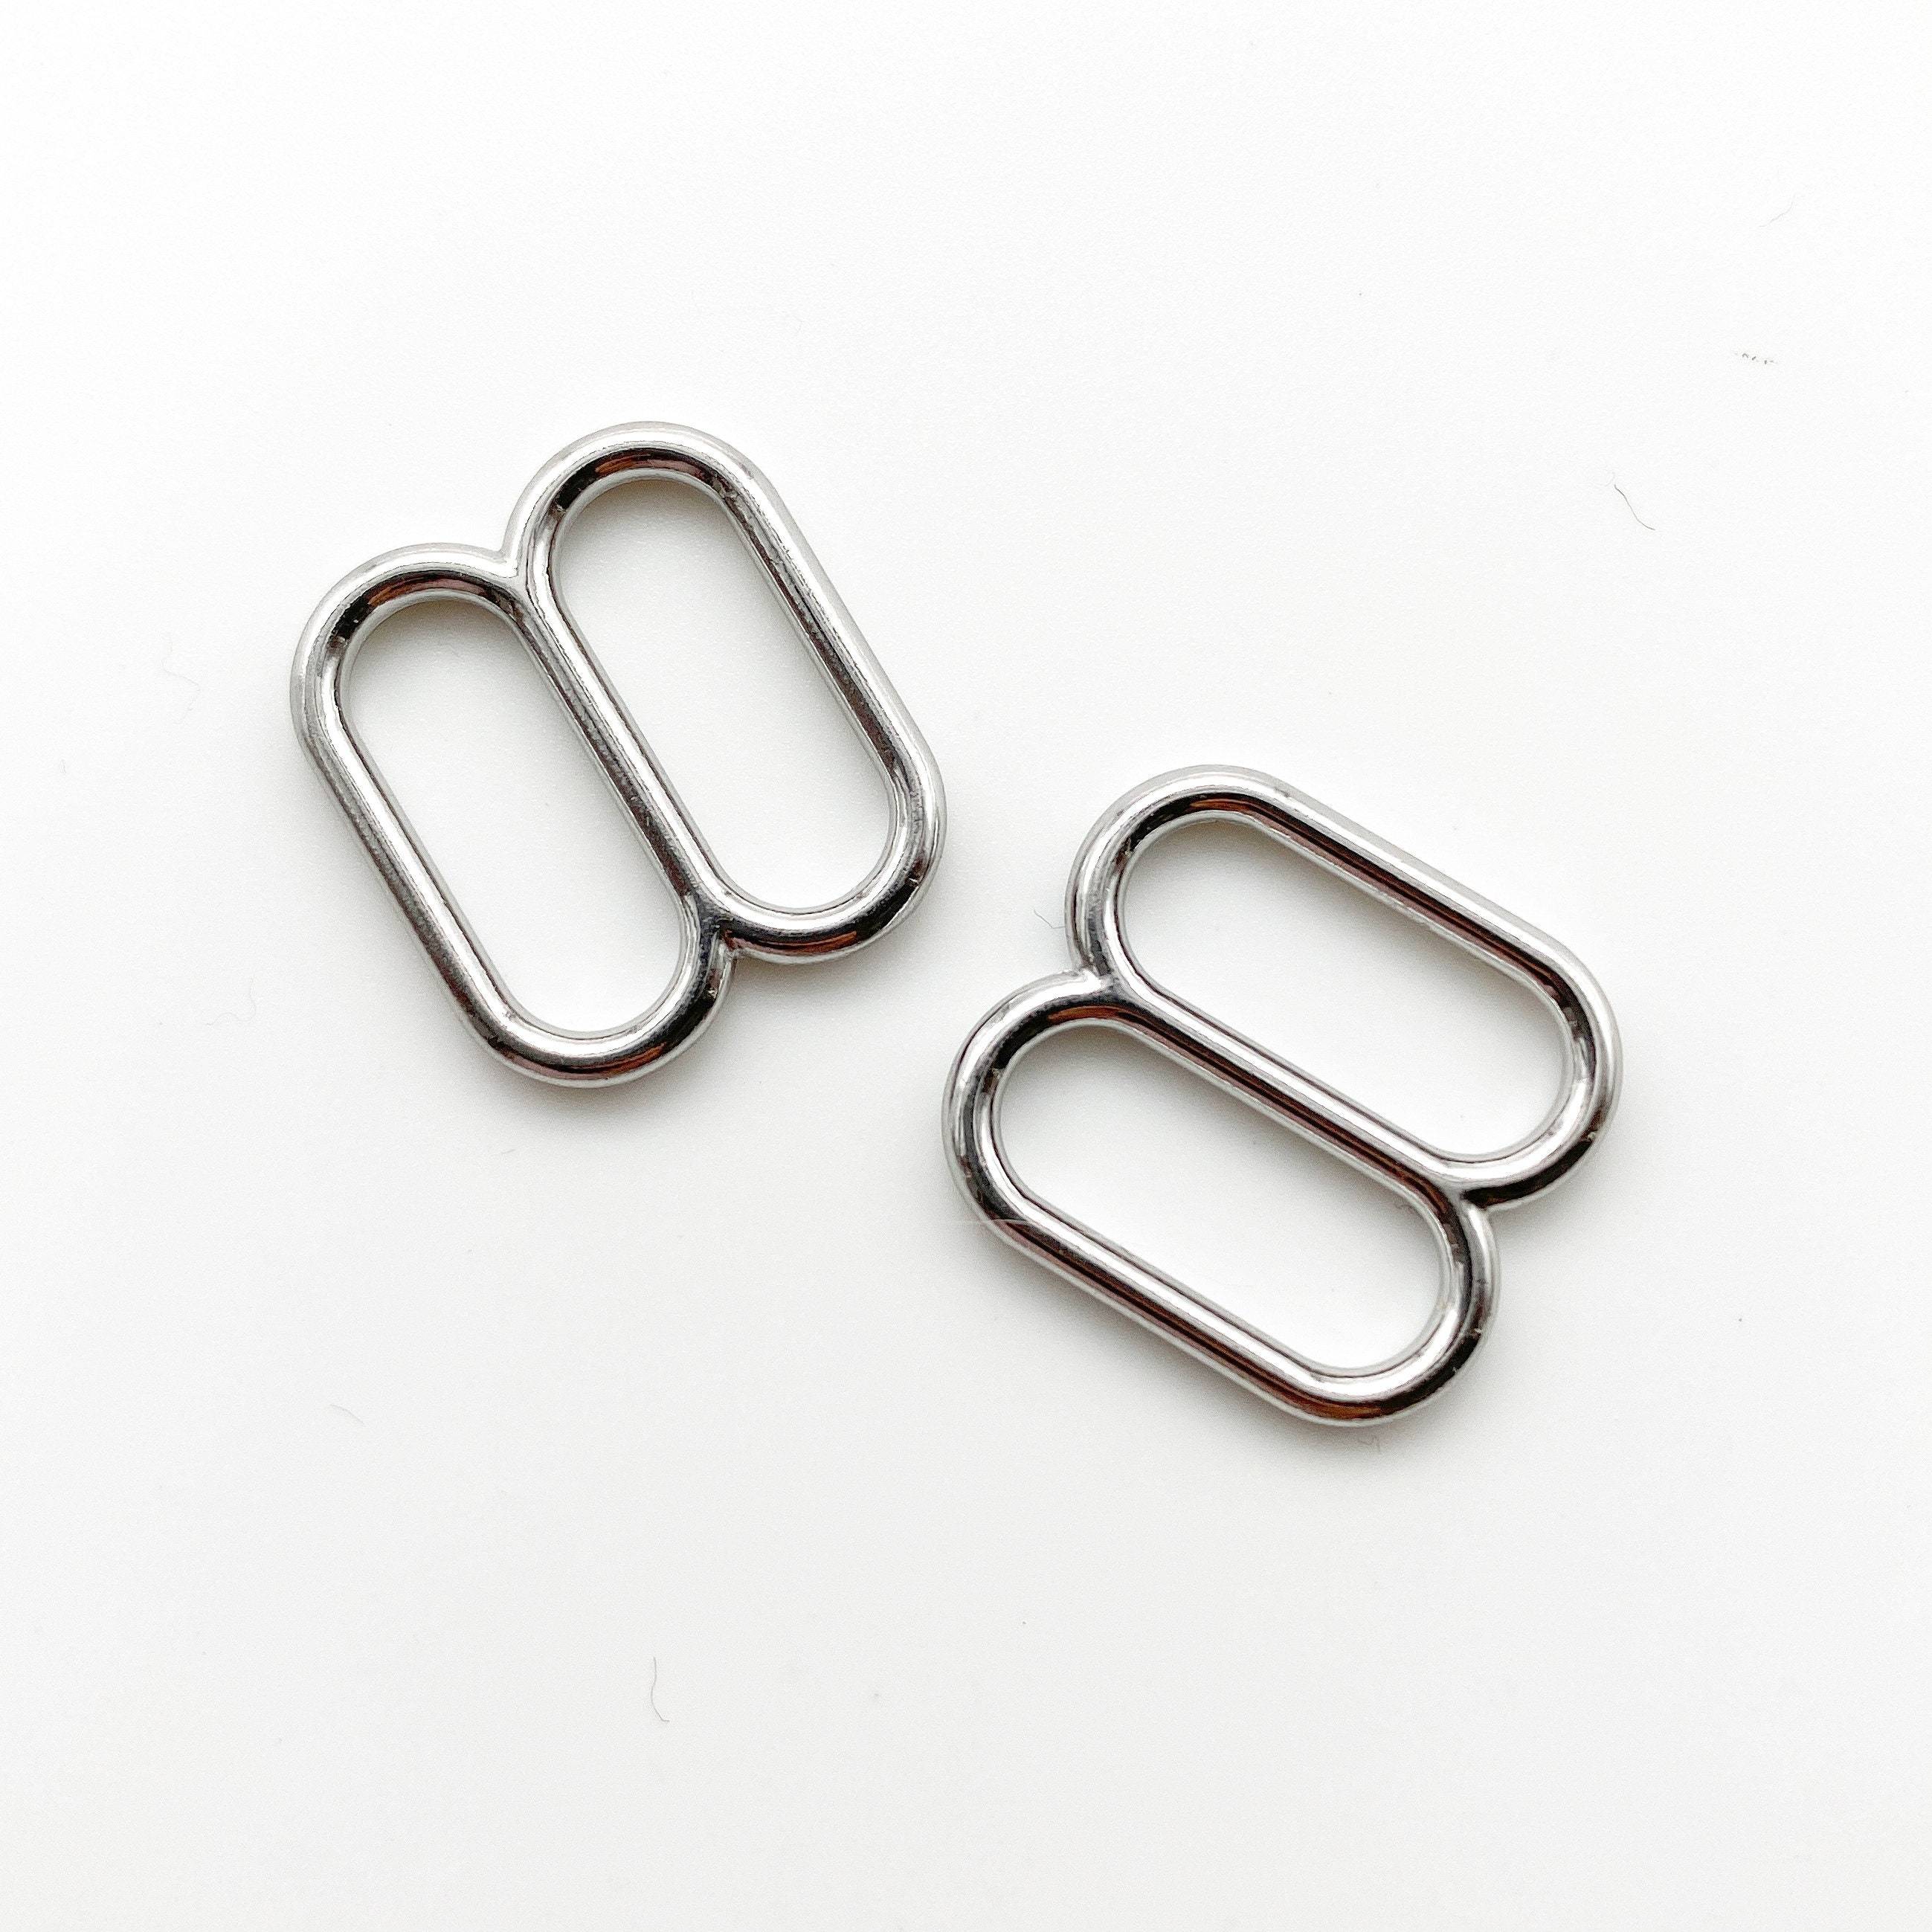 Set of 2 Thicker Rings OR 2 Tall Thick Sliders in Silver for Swimwear or Bra making- 1/4"/6mm, 3/8"/10mm, 1/2"/12mm, 5/8"/15mm - Stitch Love Studio